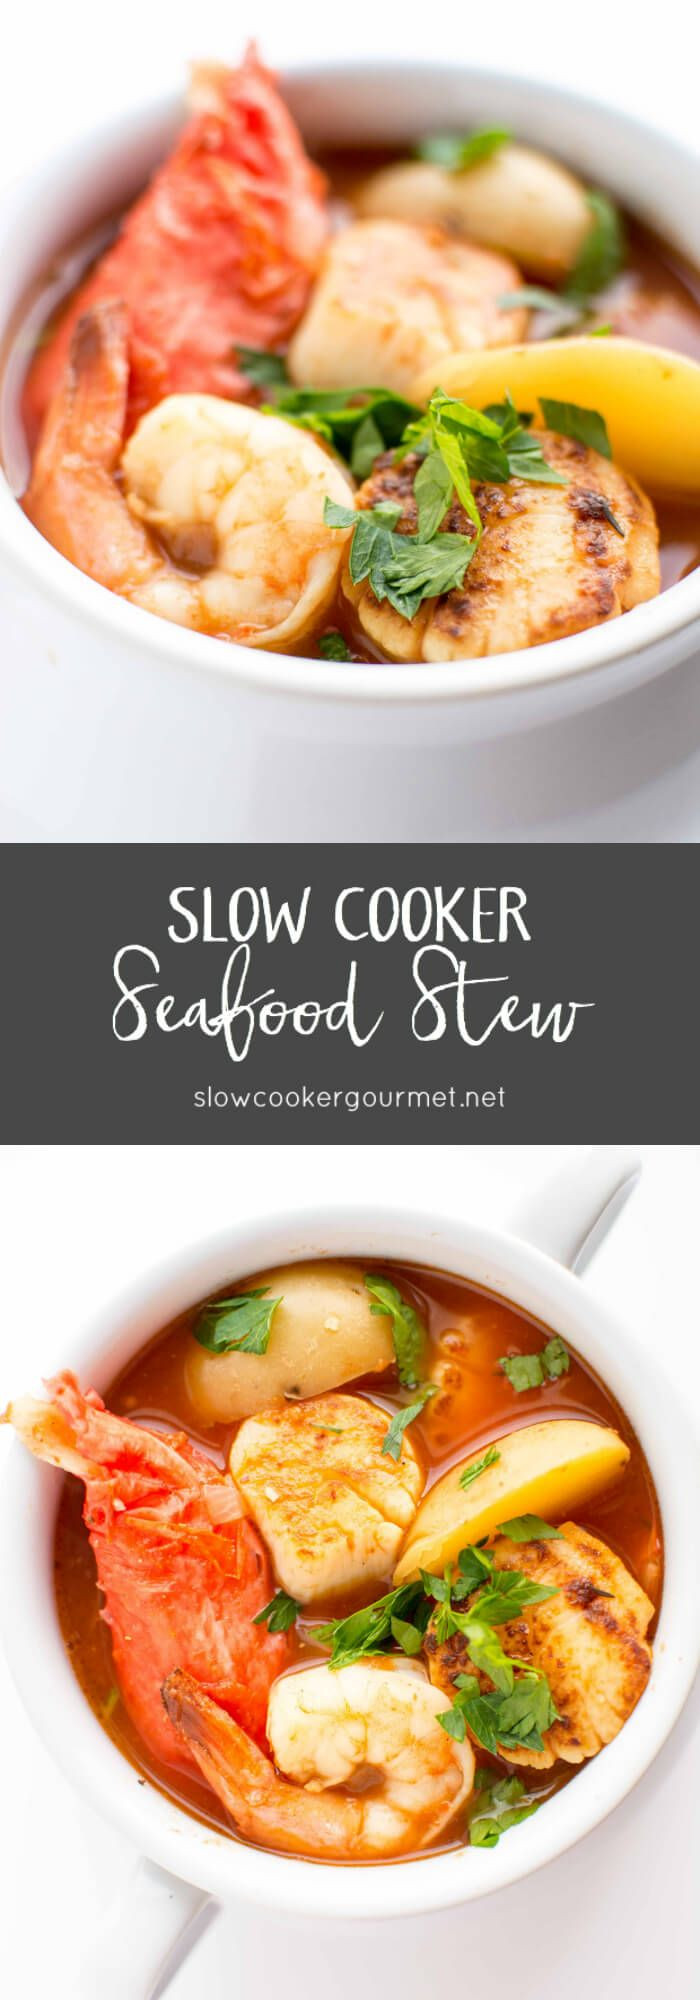 Slow Cooker Fish Stew
 Slow Cooker Seafood Stew